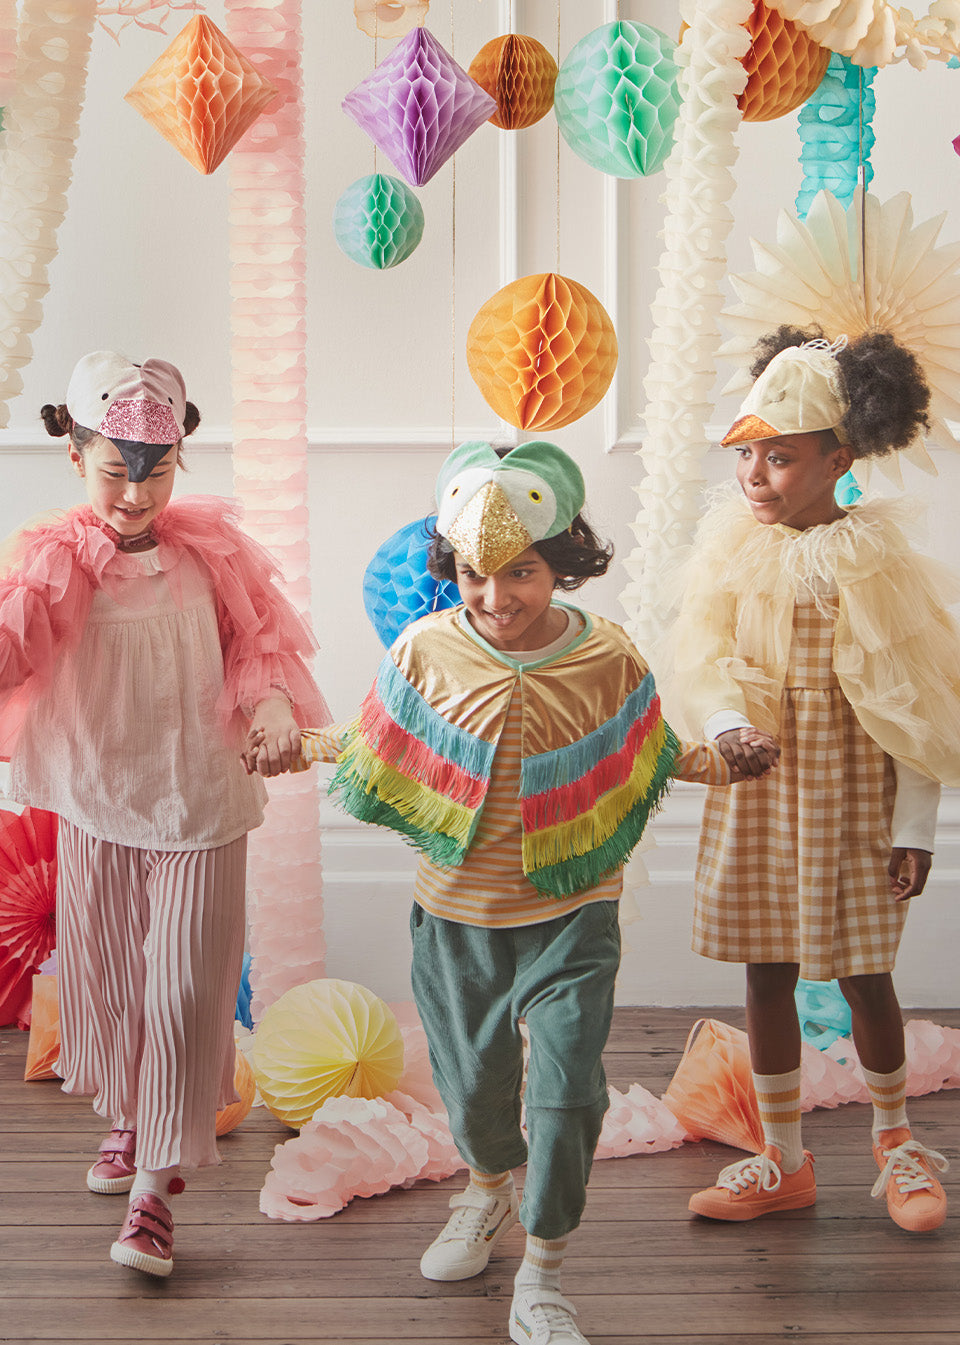 3 children dressed in various animal costumes, including a flamingo and octopus, standing in a room filled with pastel honeycomb hanging decorations and garlands